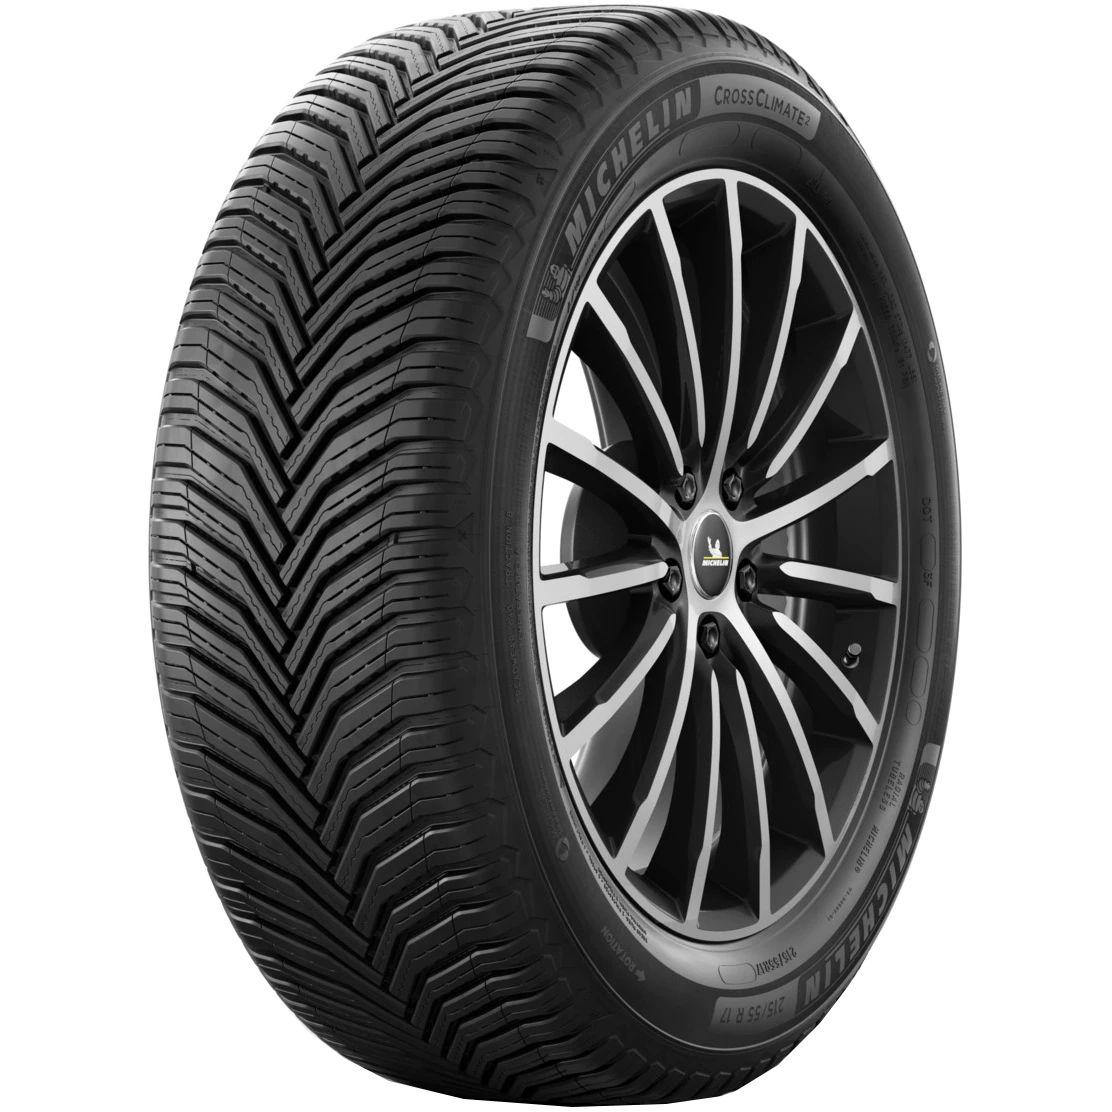 Anvelope all seasons MICHELIN CrossClimate2 M+S XL 205/50 R17 93V